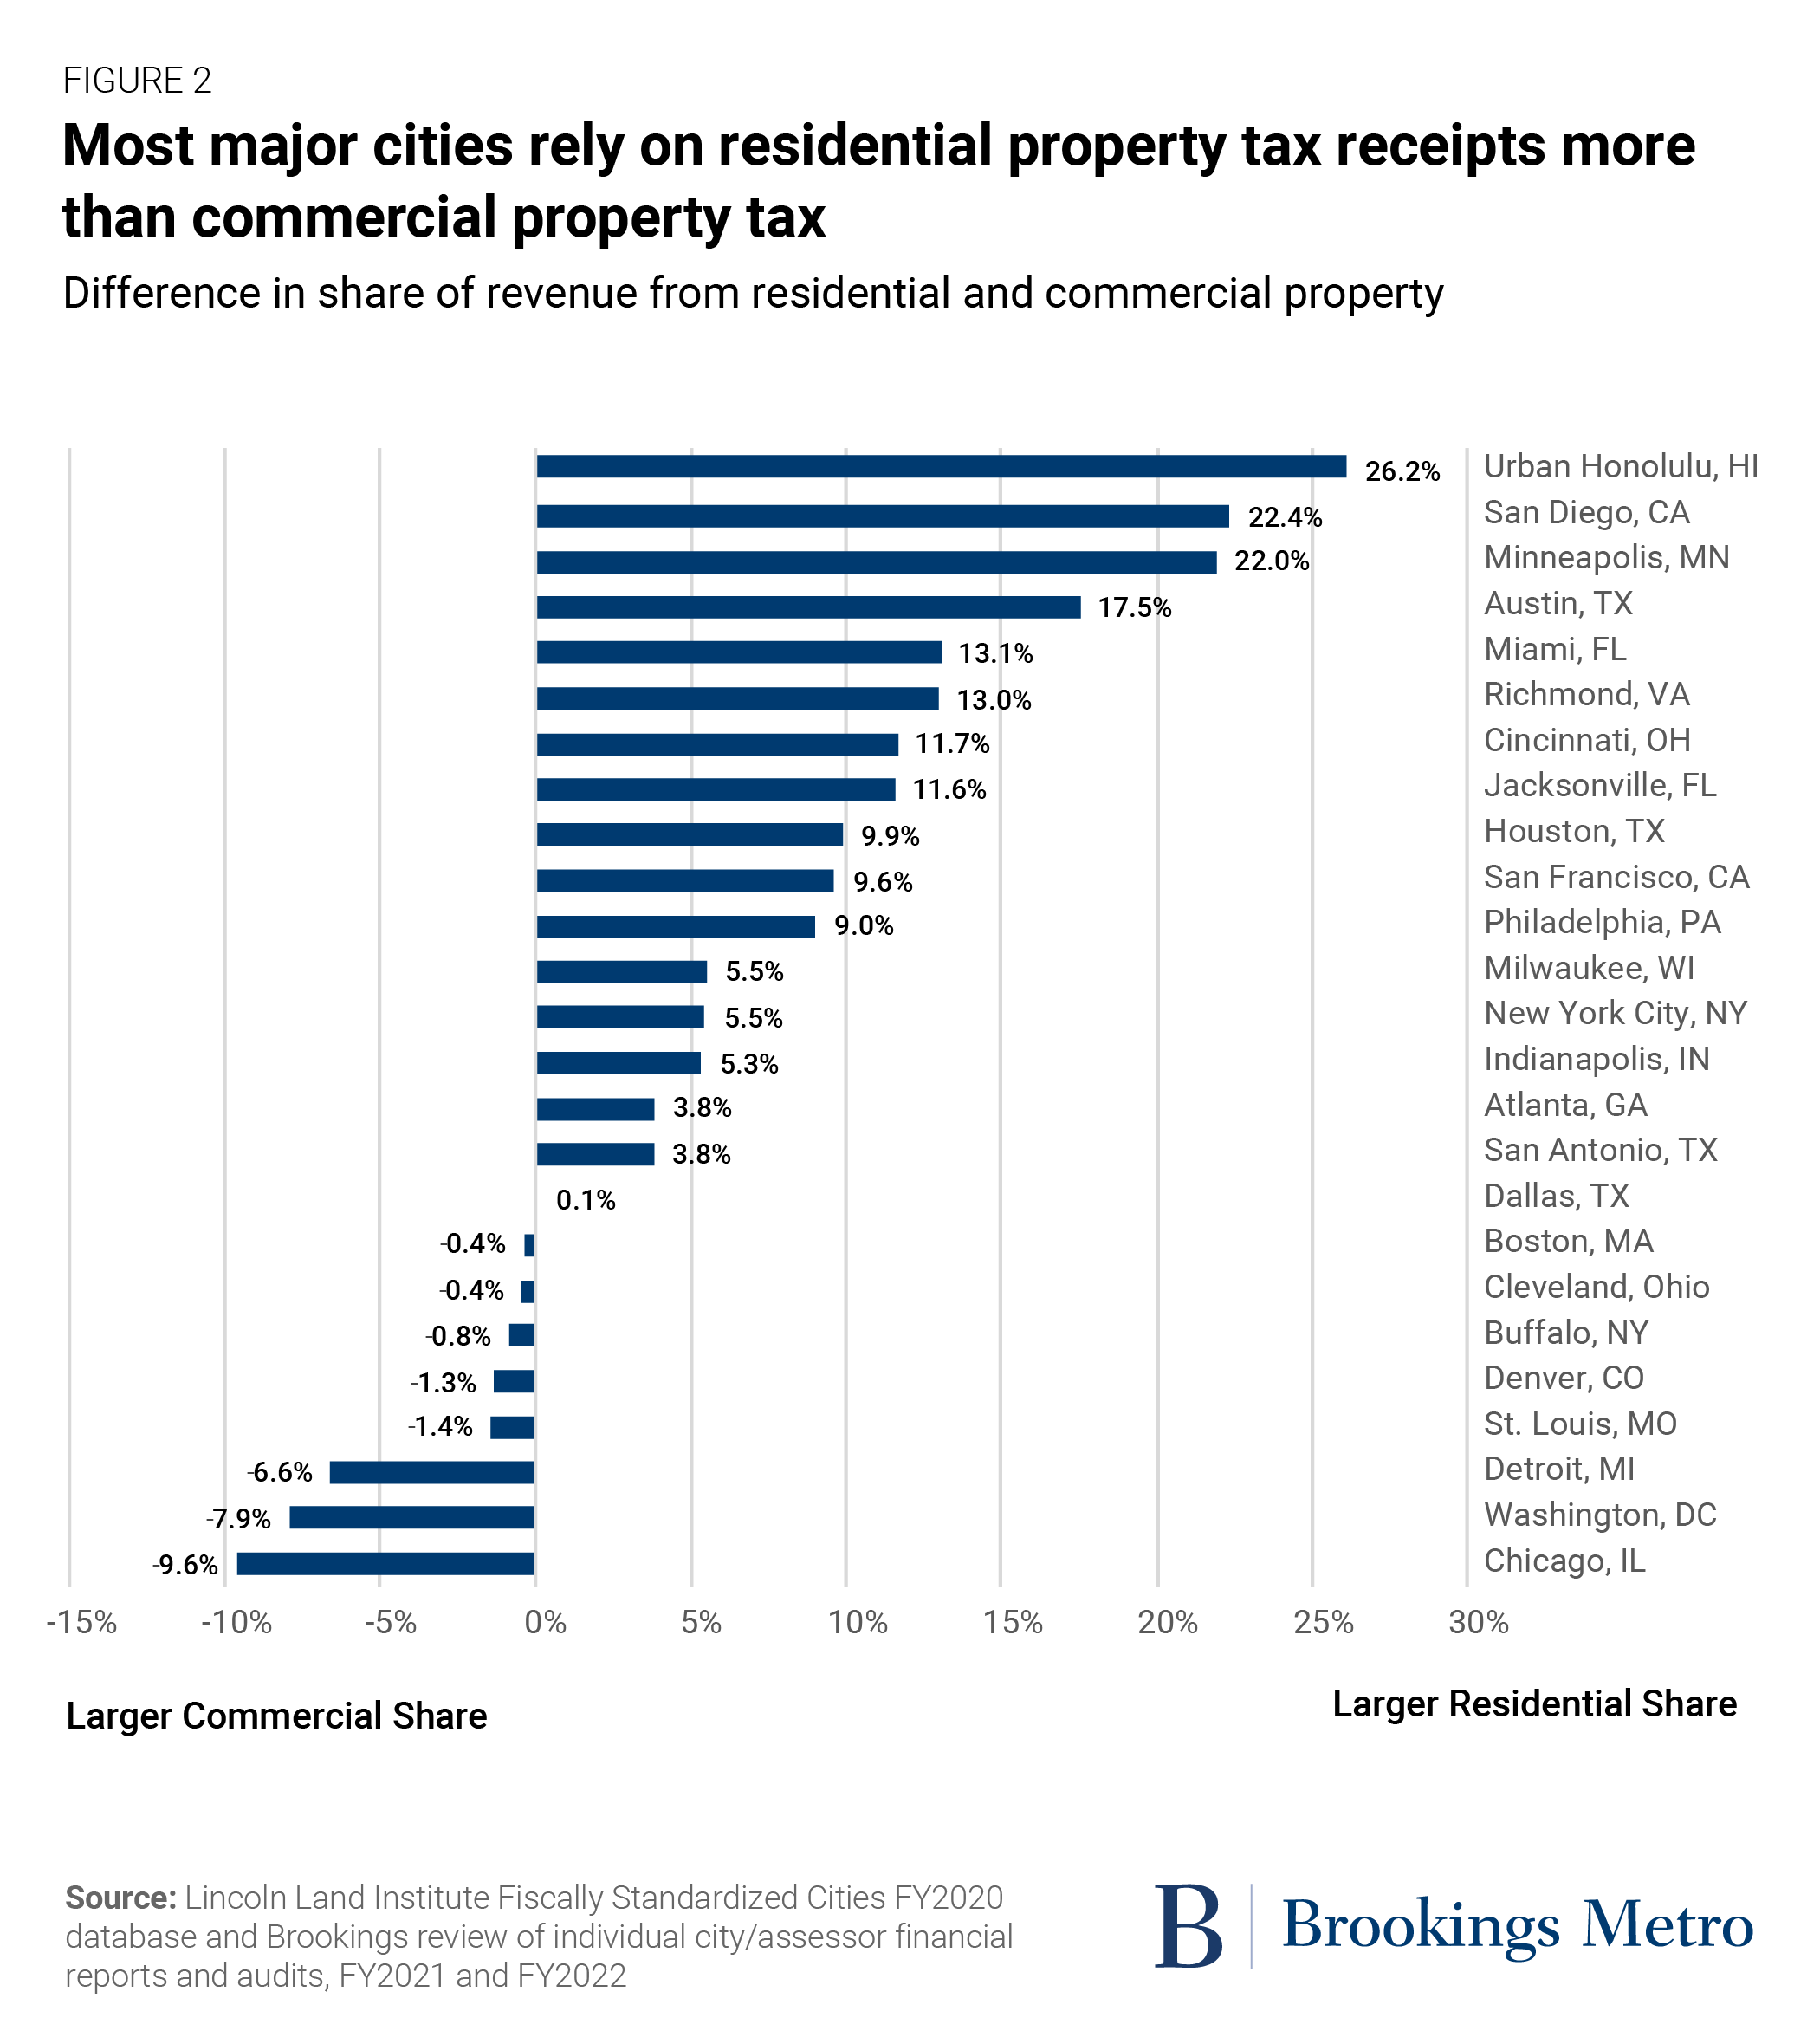 Most major cities rely on residential property tax receipts more than commercial property tax